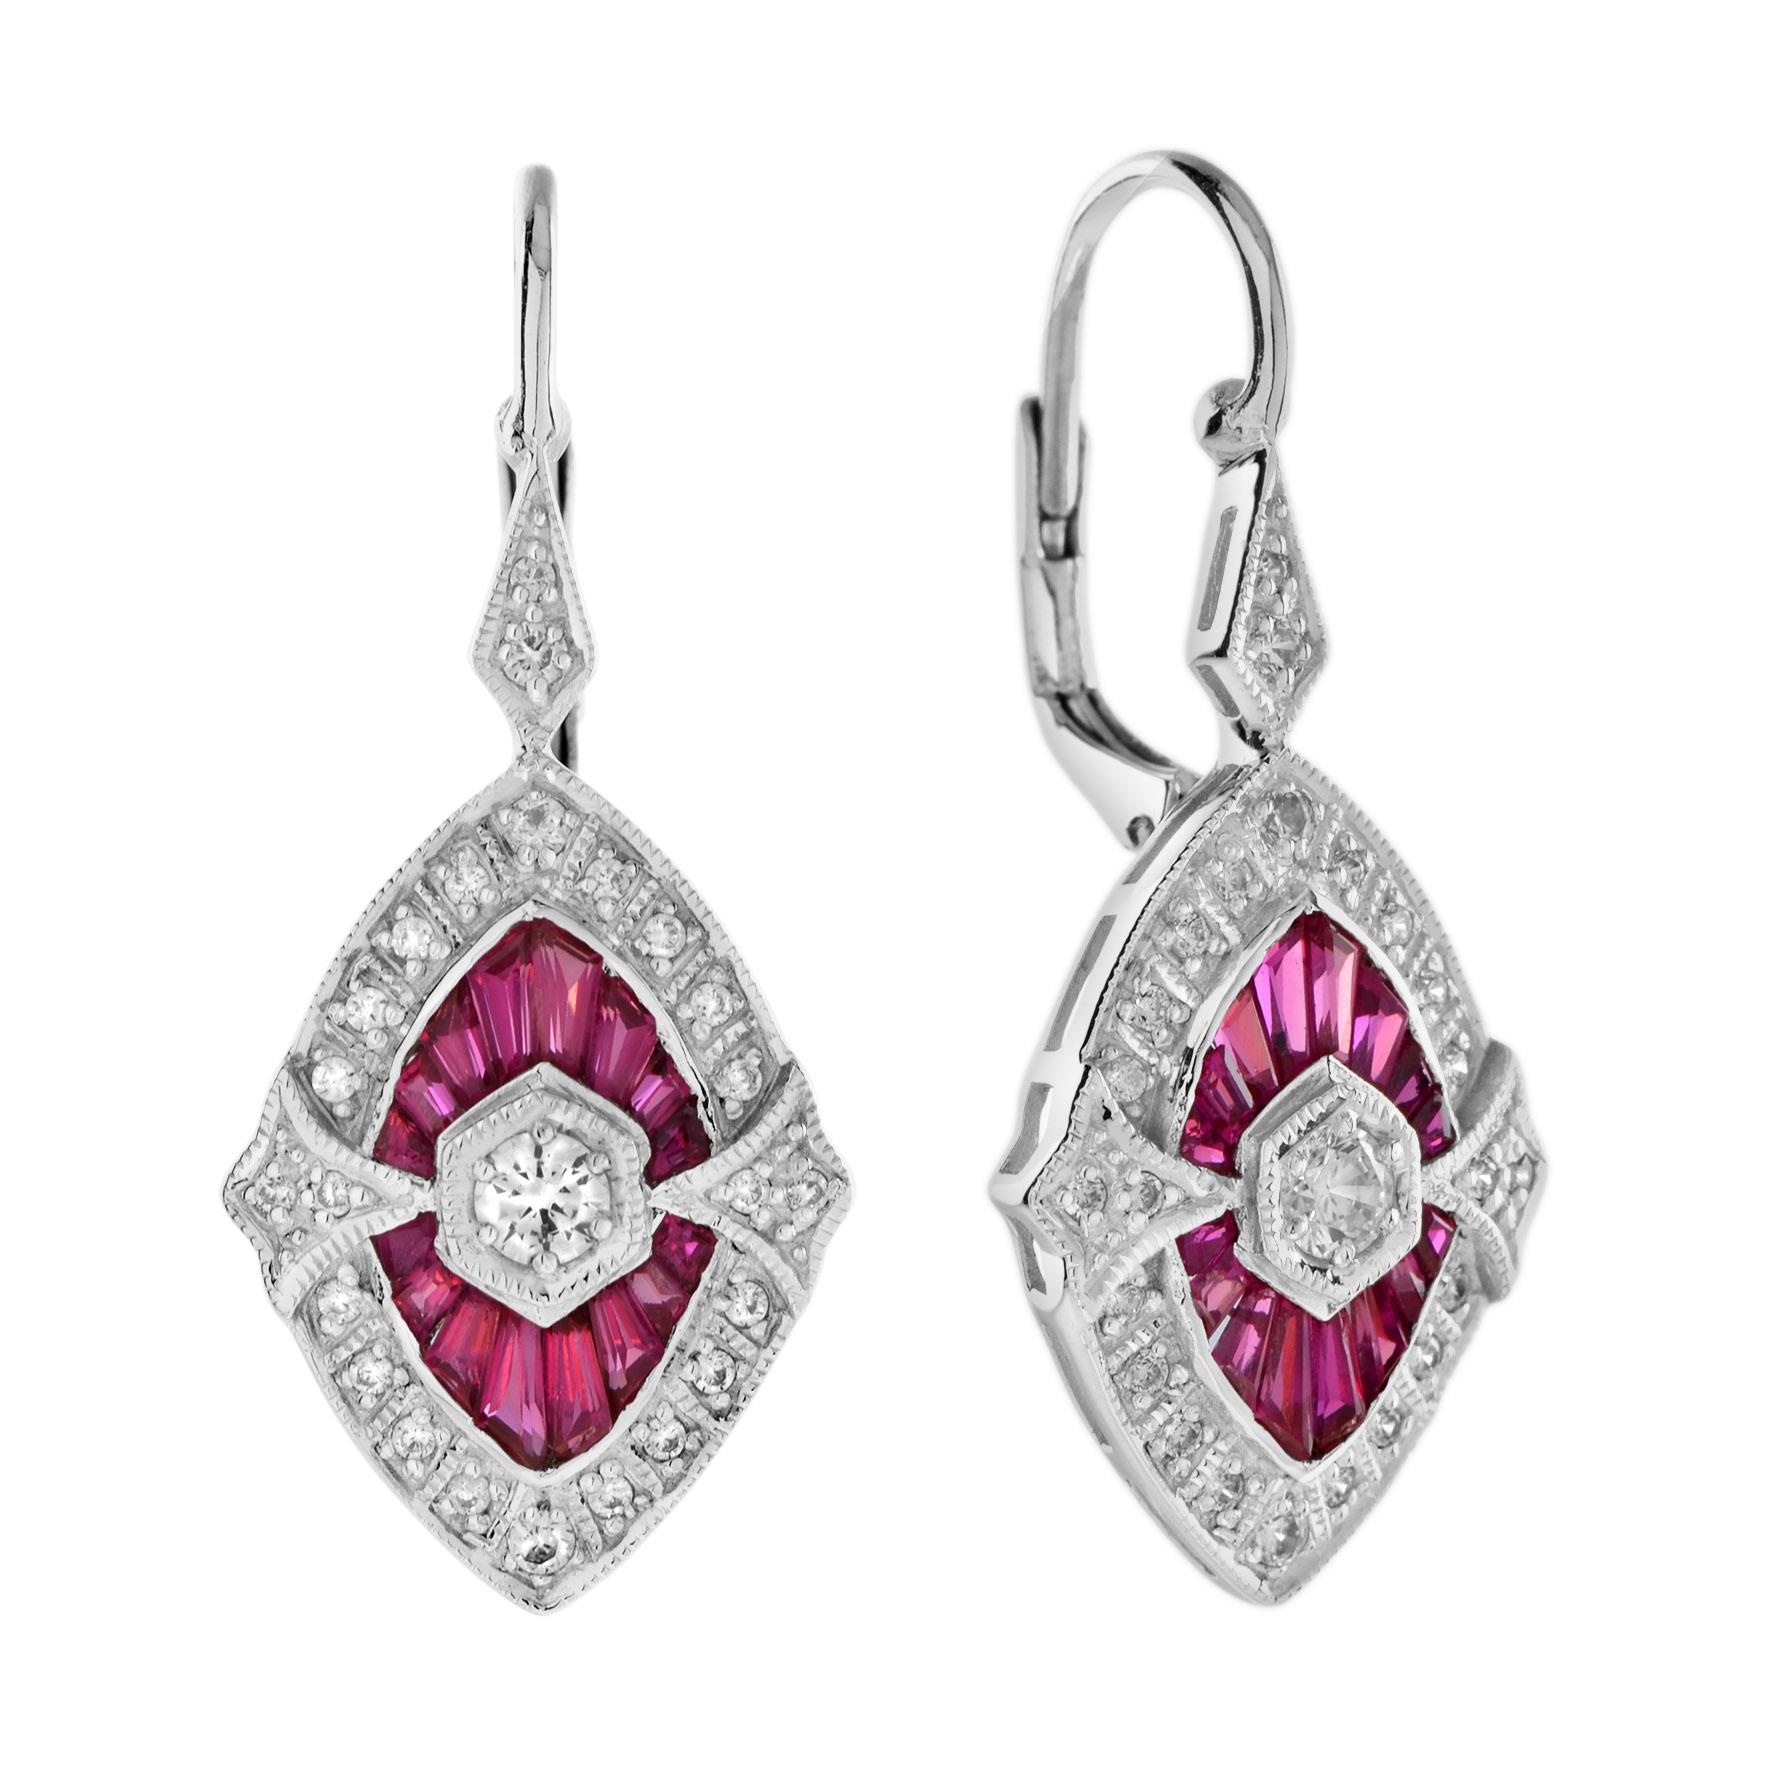 She will adore the Art Deco style brilliant sparkle of these romantic diamond and natural ruby drop earrings and bangle set. Crated in 18k white gold with millgrain setting, each light-catching piece features a marquise-shape composite of round